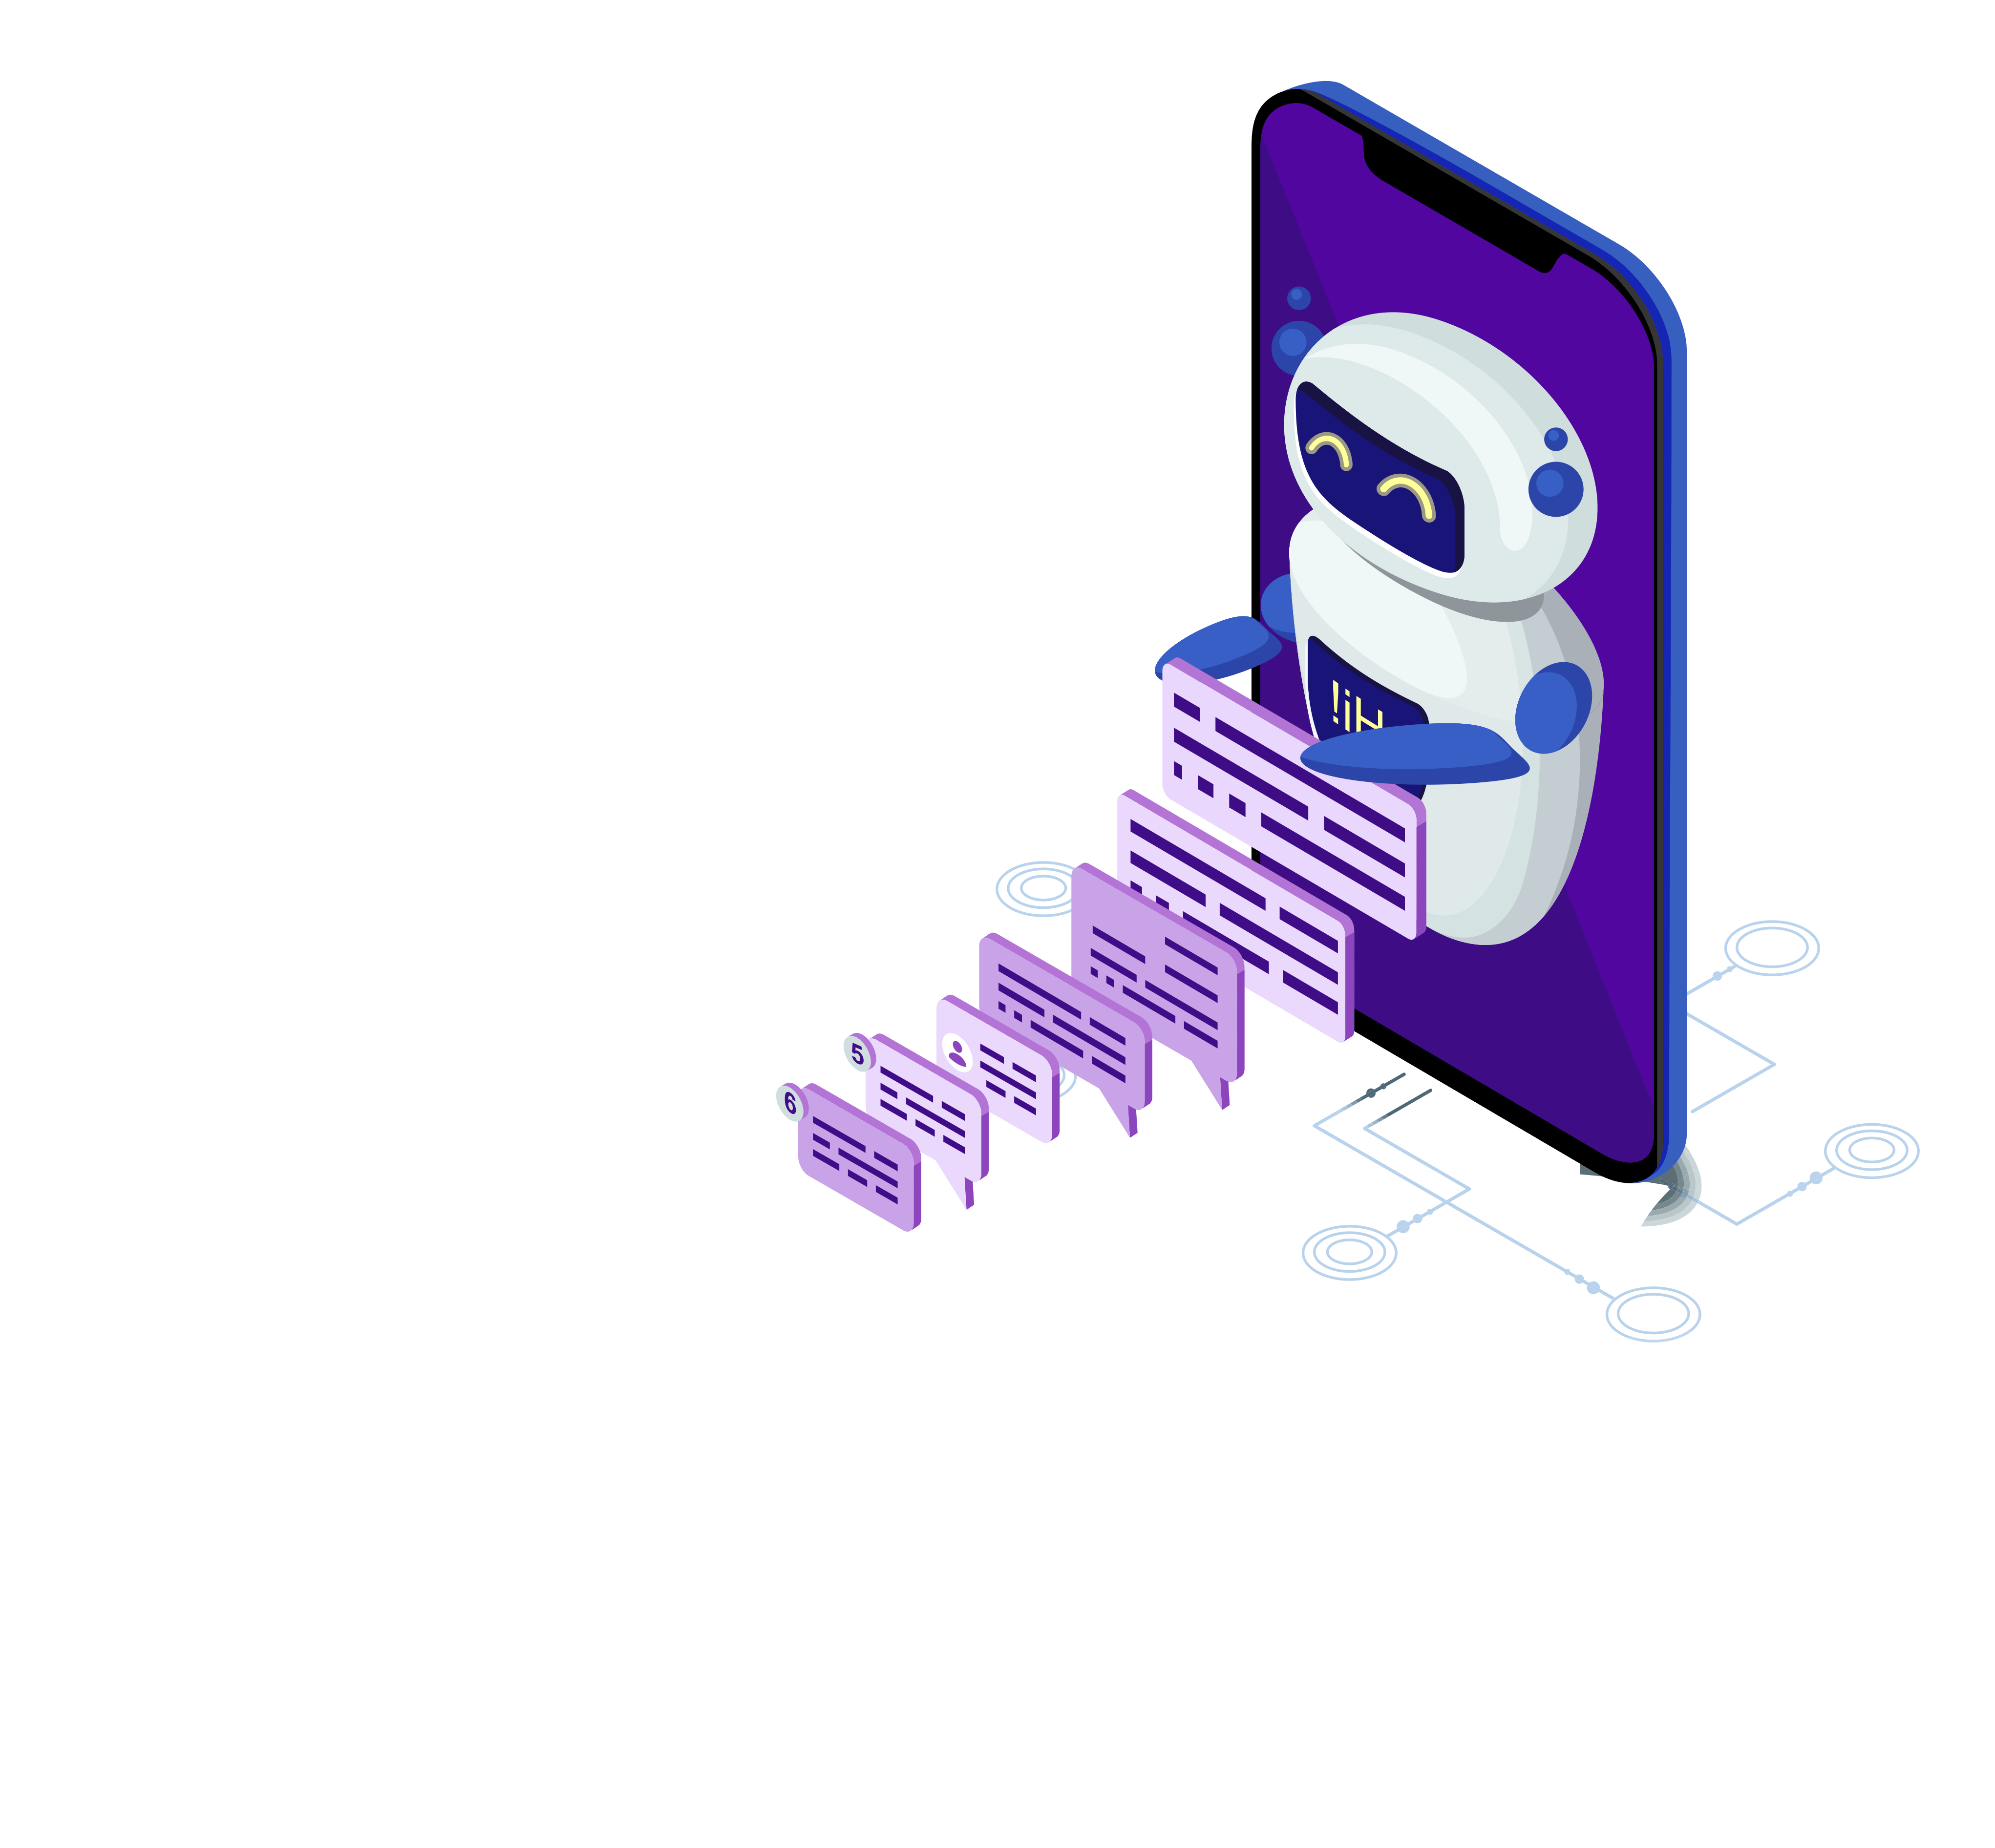 Enhance the business CRM with our Chatbot